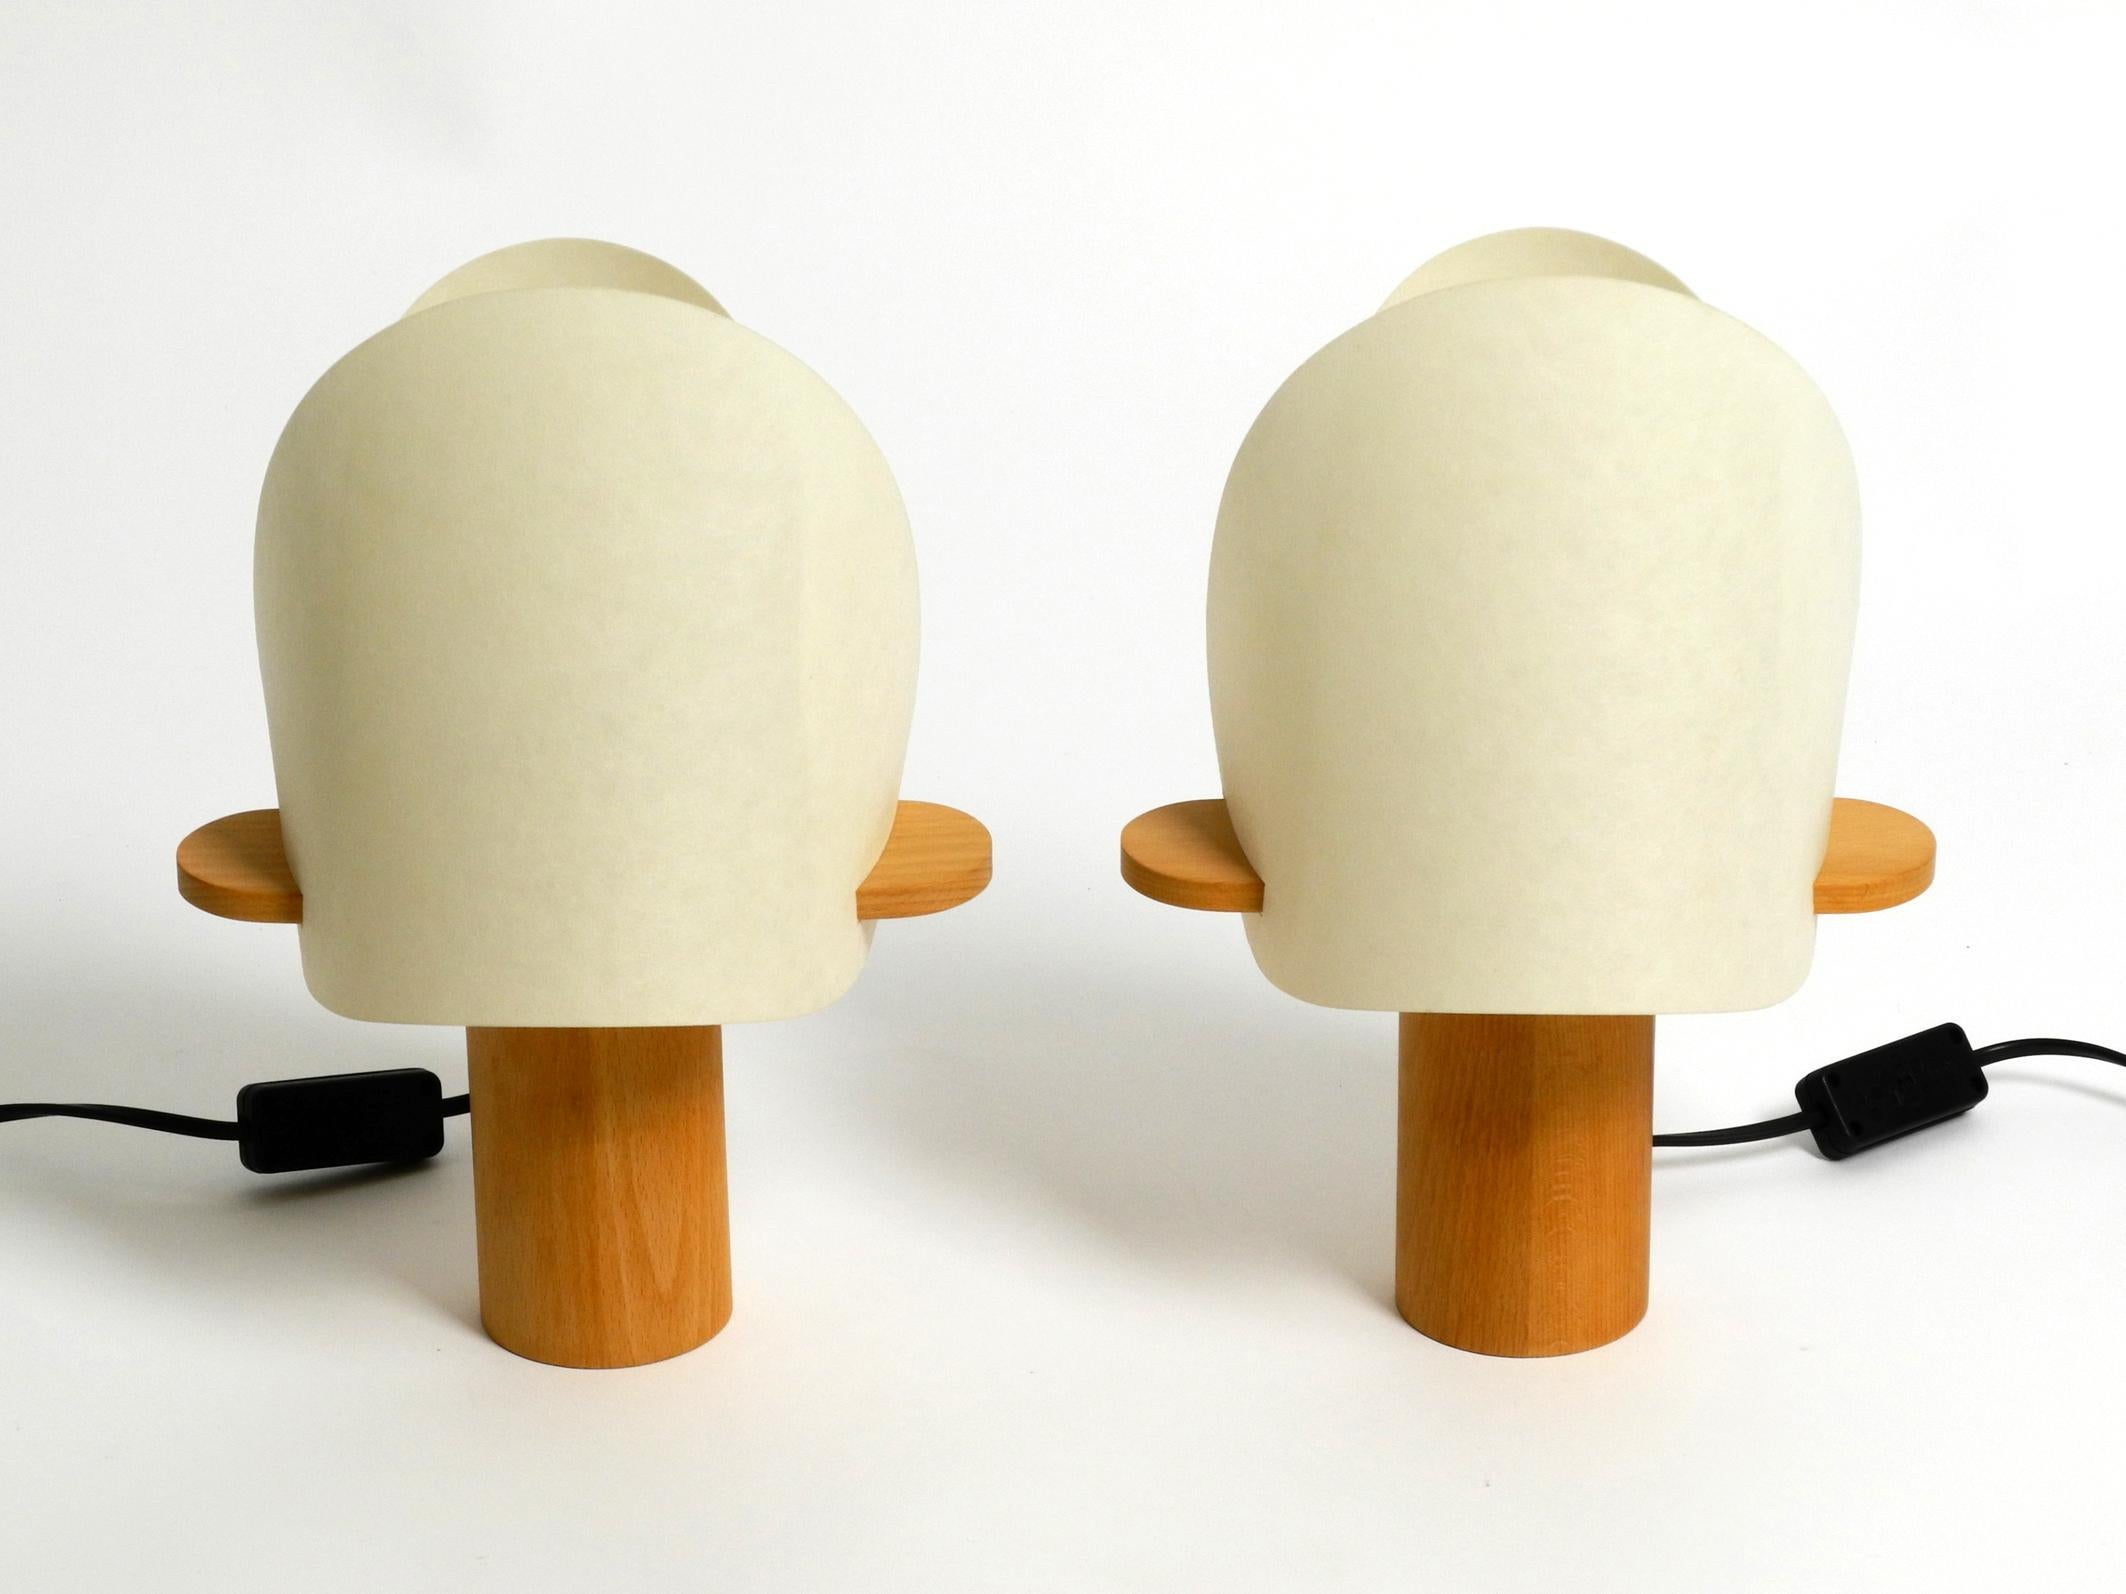 Two Charming Minimalistic Oak Table Lamps with Lunopal Shades by Domus  1980s For Sale 12